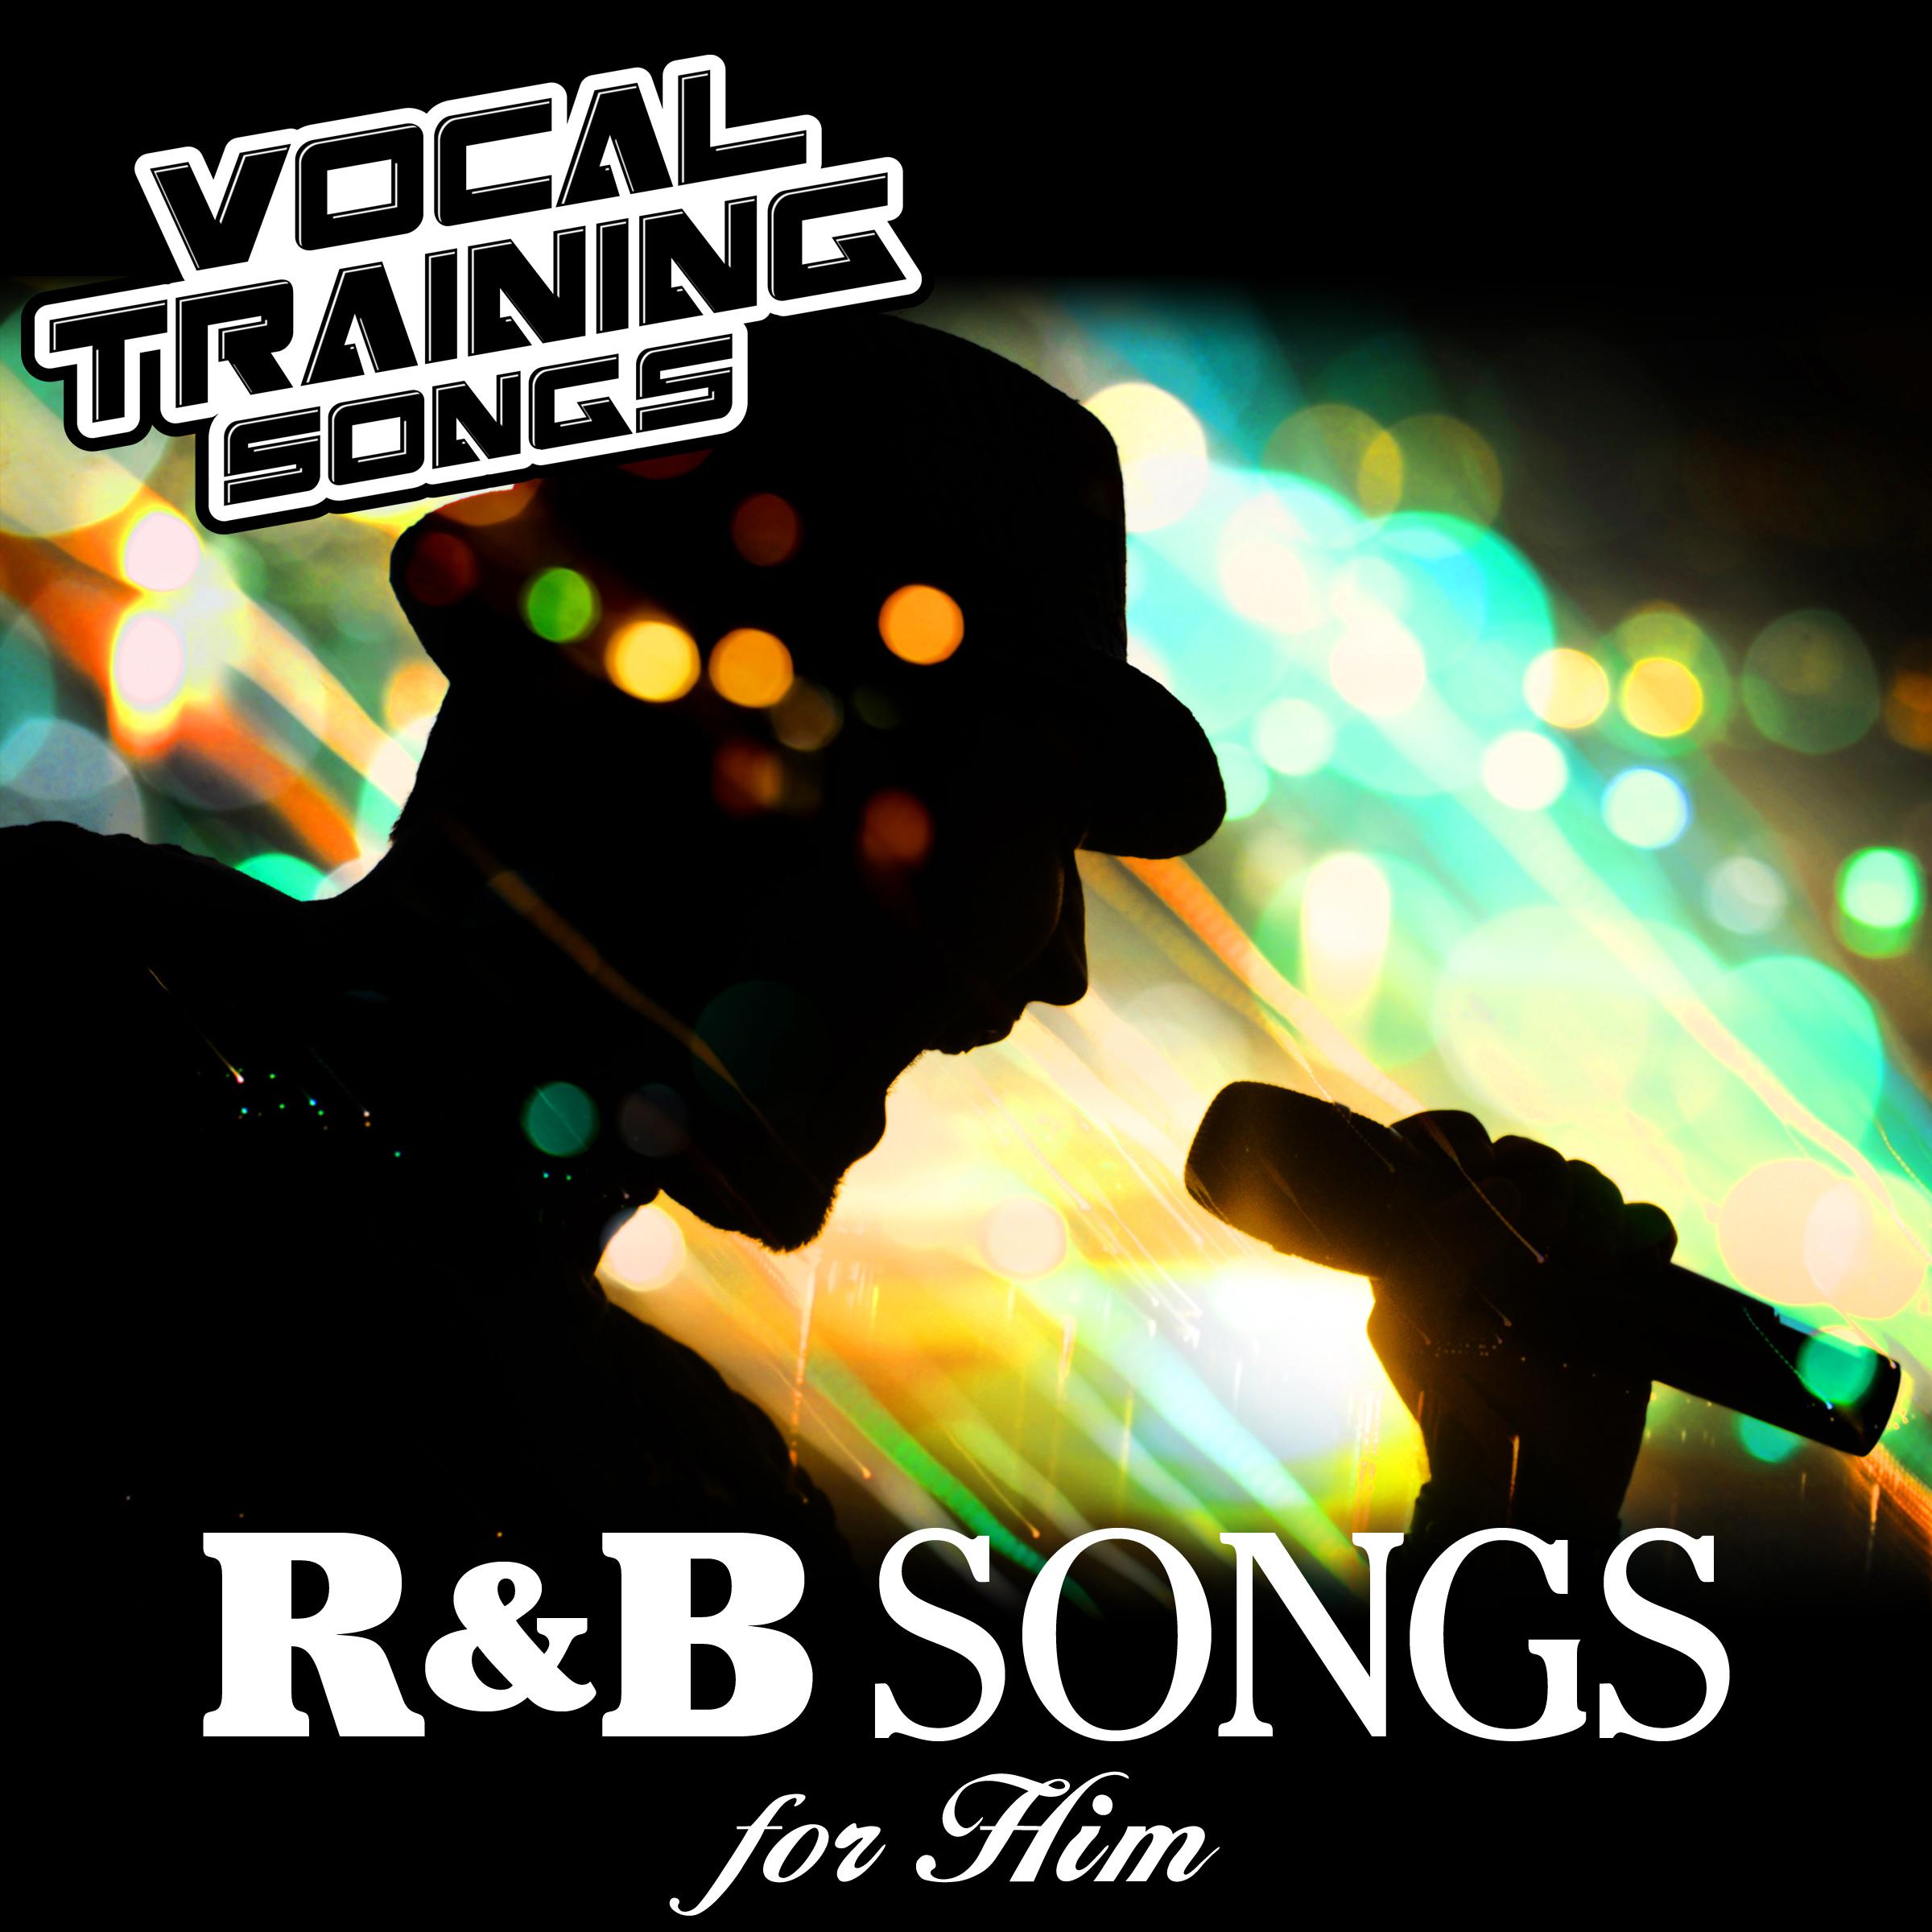 R&B Songs for Him - Vocal Training Songs